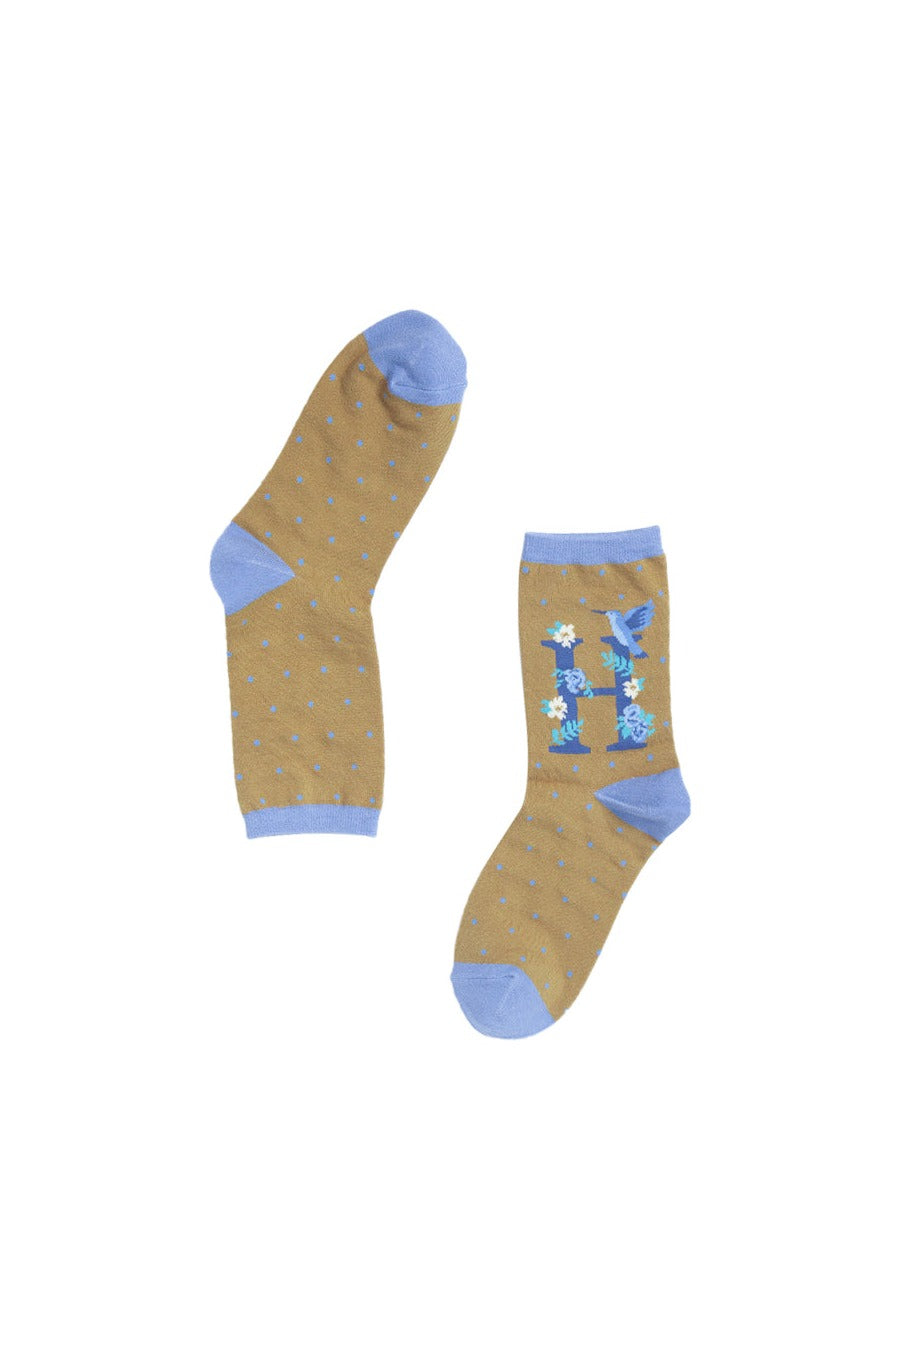 mustard yellow, blue bamboo socks with the initial H